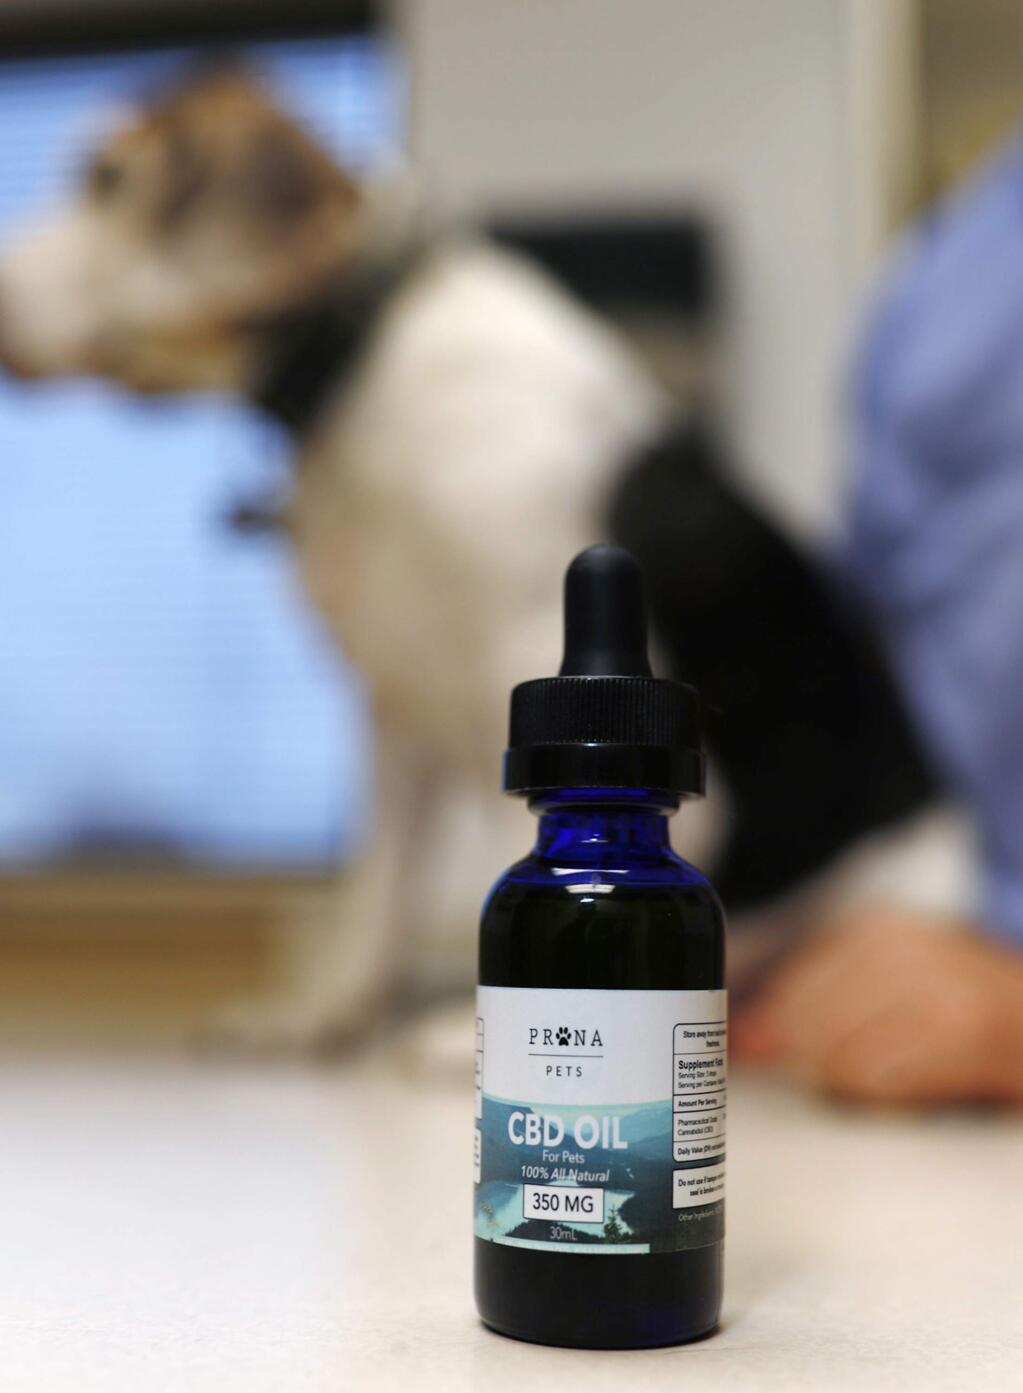 In this Monday, Oct. 30, 2017, photo, a bottle of CBD oil sits on a counter after Luke Byerly administered a dose of the liquid to his 14-year-old beagle, Robbie, during a break at Byerly's job as a technician at a veterinary clinic in east Denver. People anxious to relieve suffering in their pets are increasingly turning to oils and powders that contain CBDs, a non-psychoactive component of marijuana. (AP Photo/David Zalubowski)